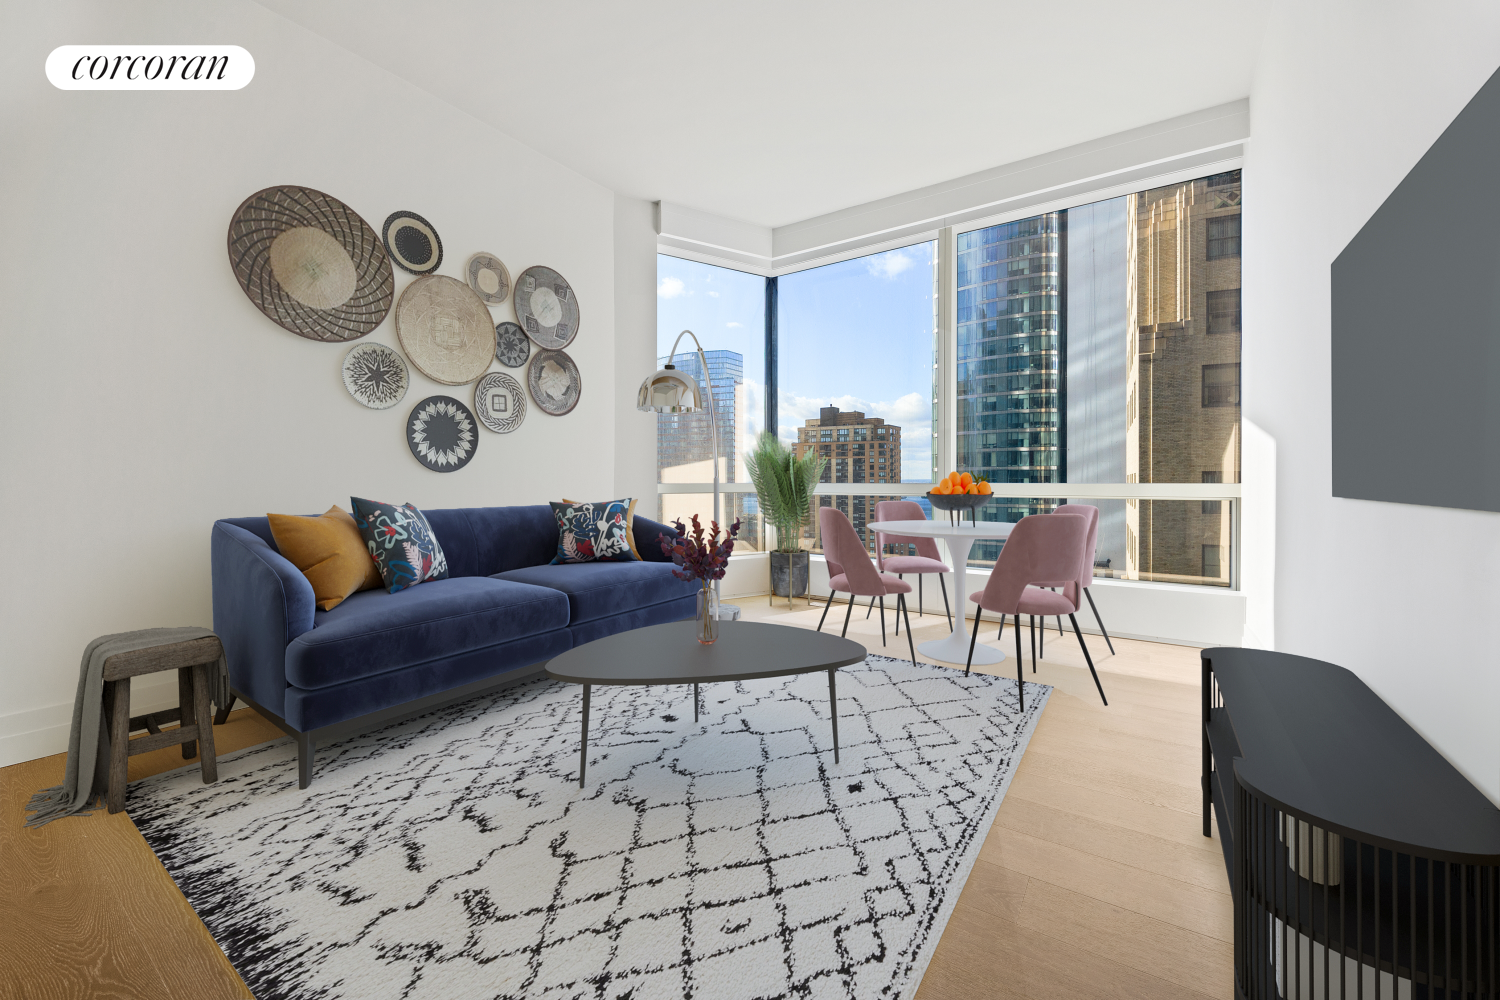 77 Greenwich Street 19C, Financial District, Downtown, NYC - 2 Bedrooms  
2.5 Bathrooms  
4 Rooms - 